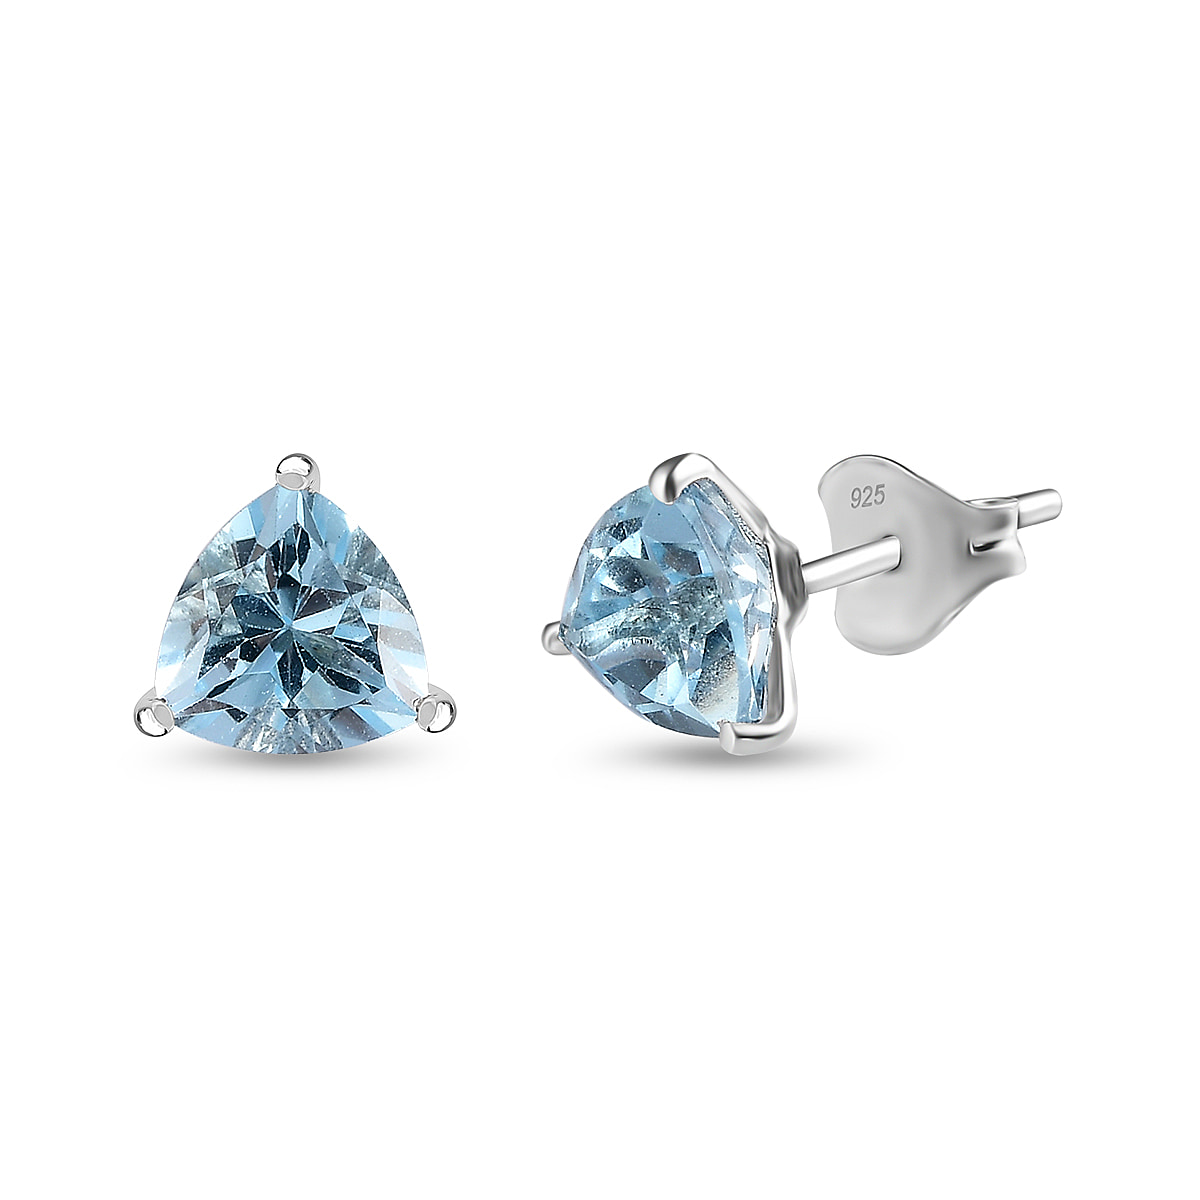 One Time Closeout Skyblue Topaz Solitaire Earrings in Platinum Overlay Sterling Silver 2.60 Ct.